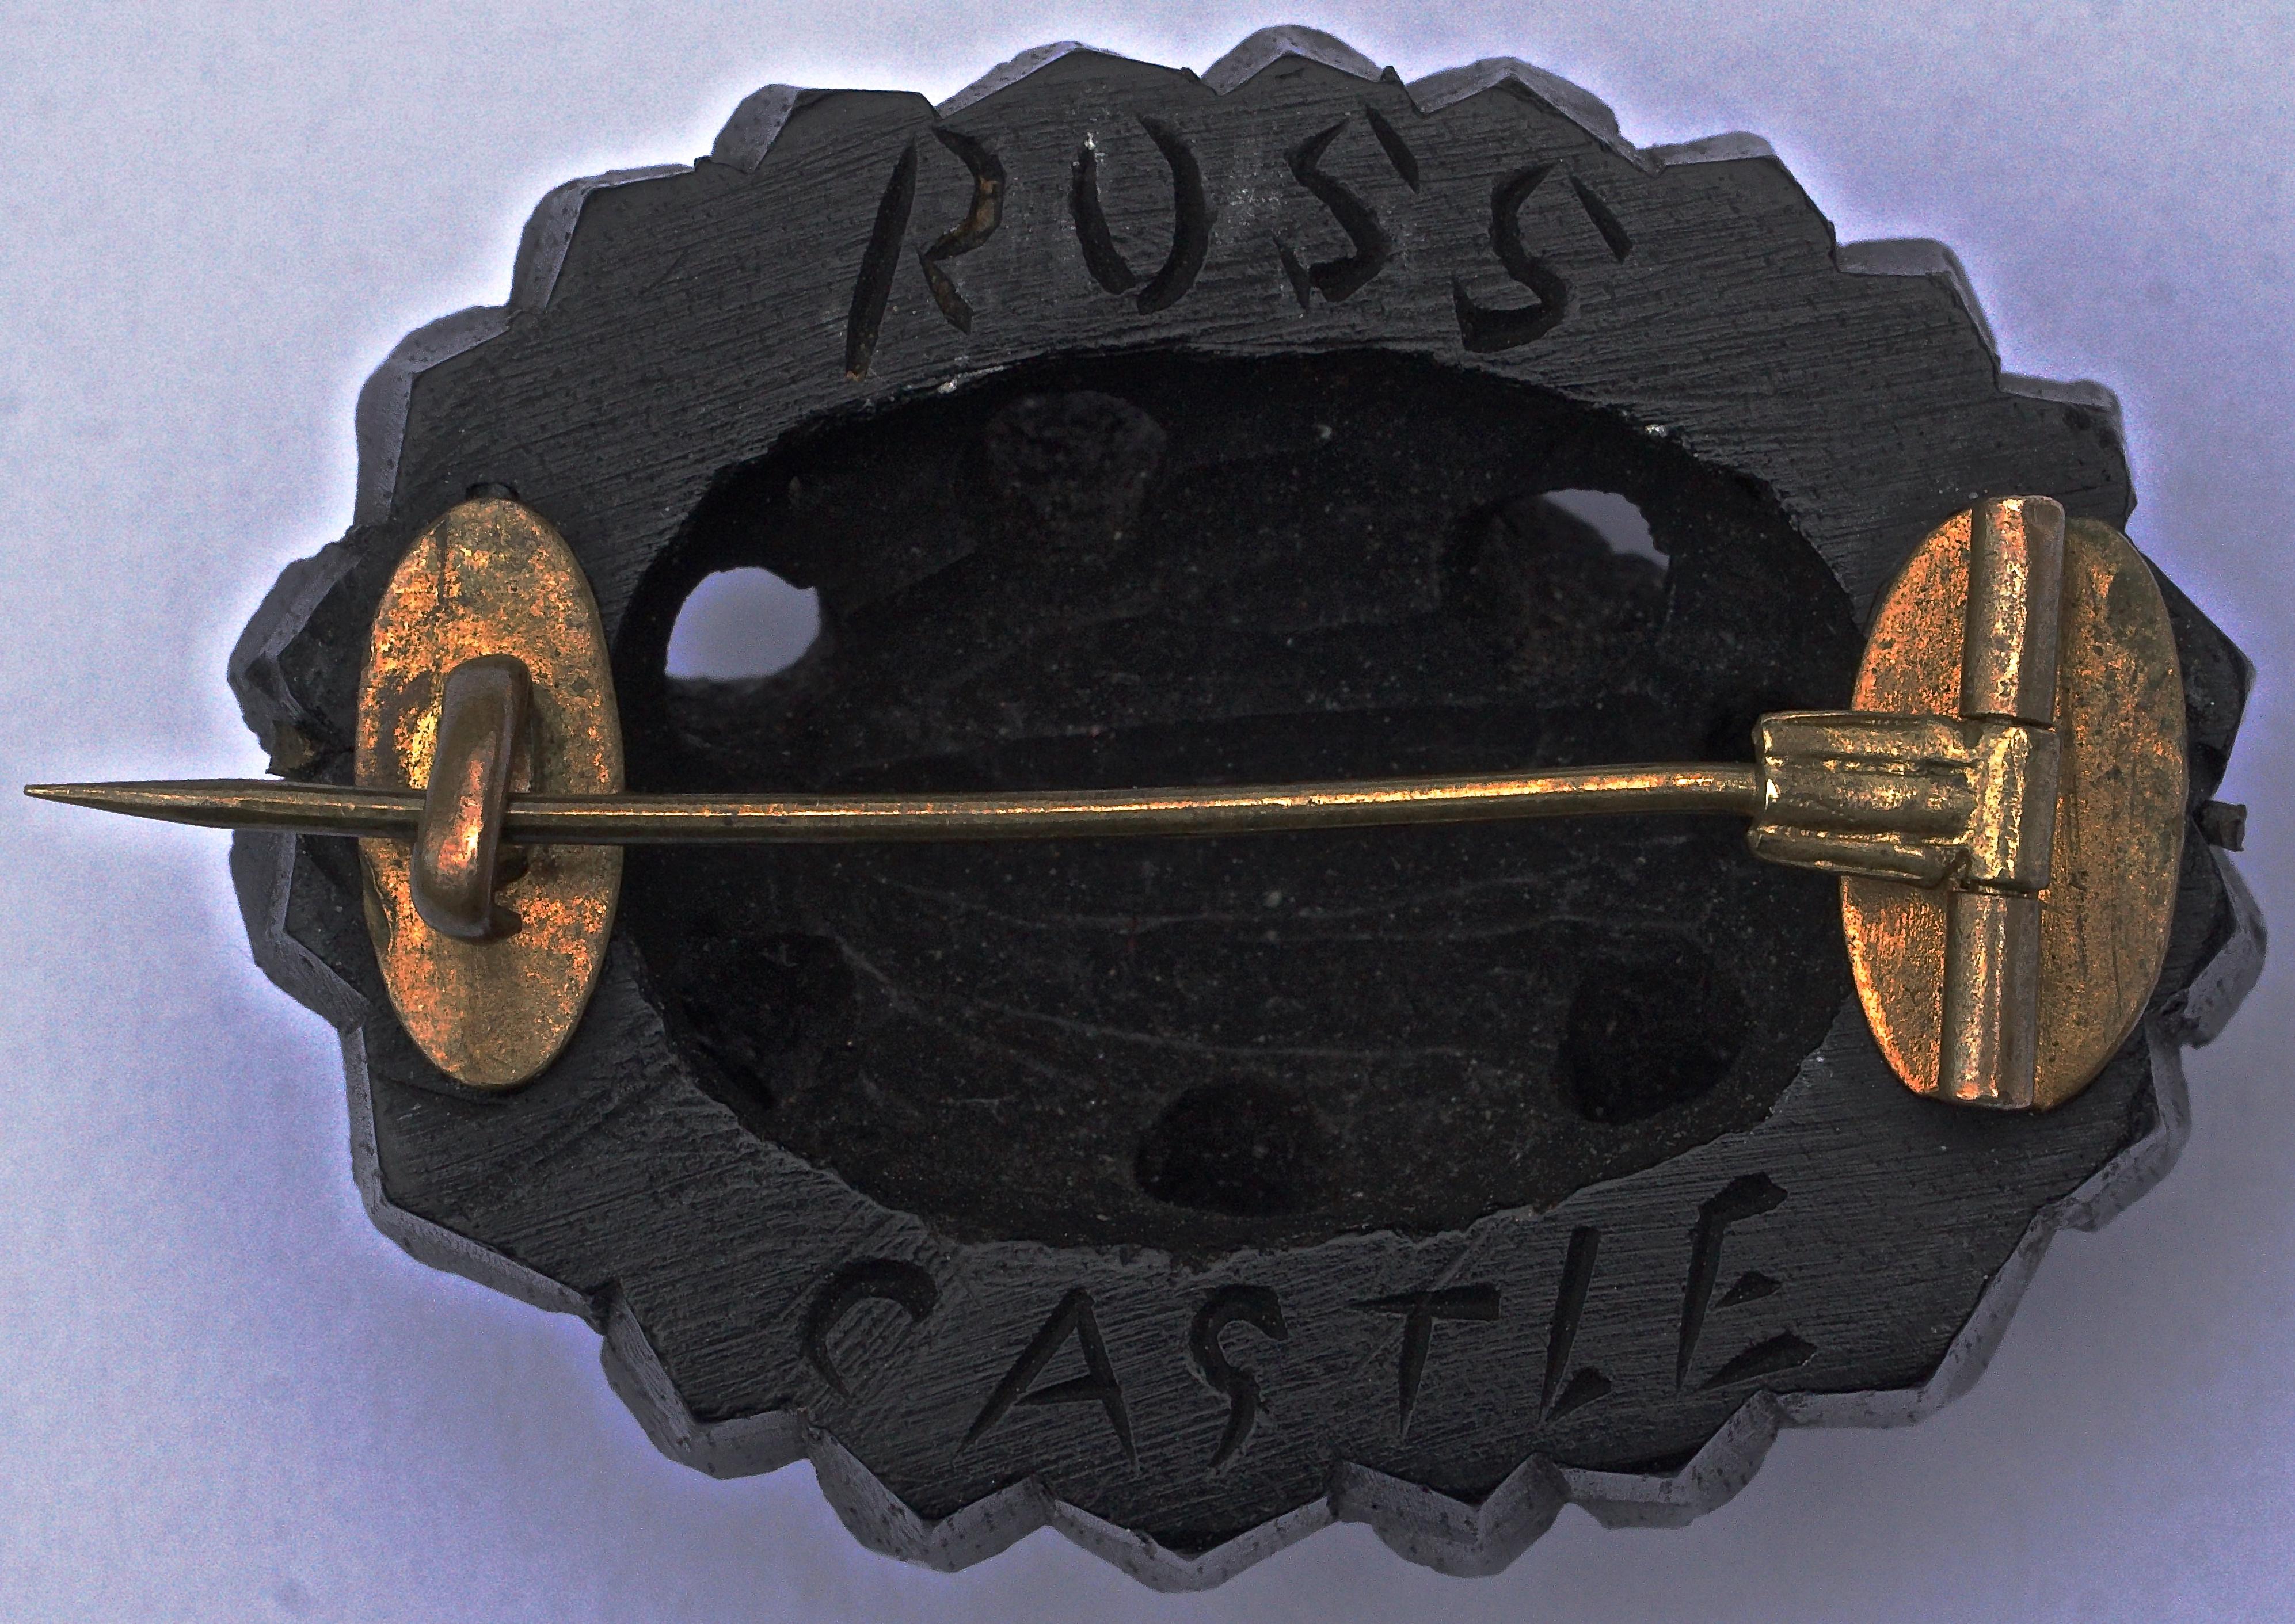 Victorian hand carved Irish bog oak brooch featuring Ross Castle in bas relief encircled by shamrocks. It has the old 'C' hook clasp and tube pin assembly in gold tone metal, which dates this lovely antique brooch to around 1890. The brooch measures